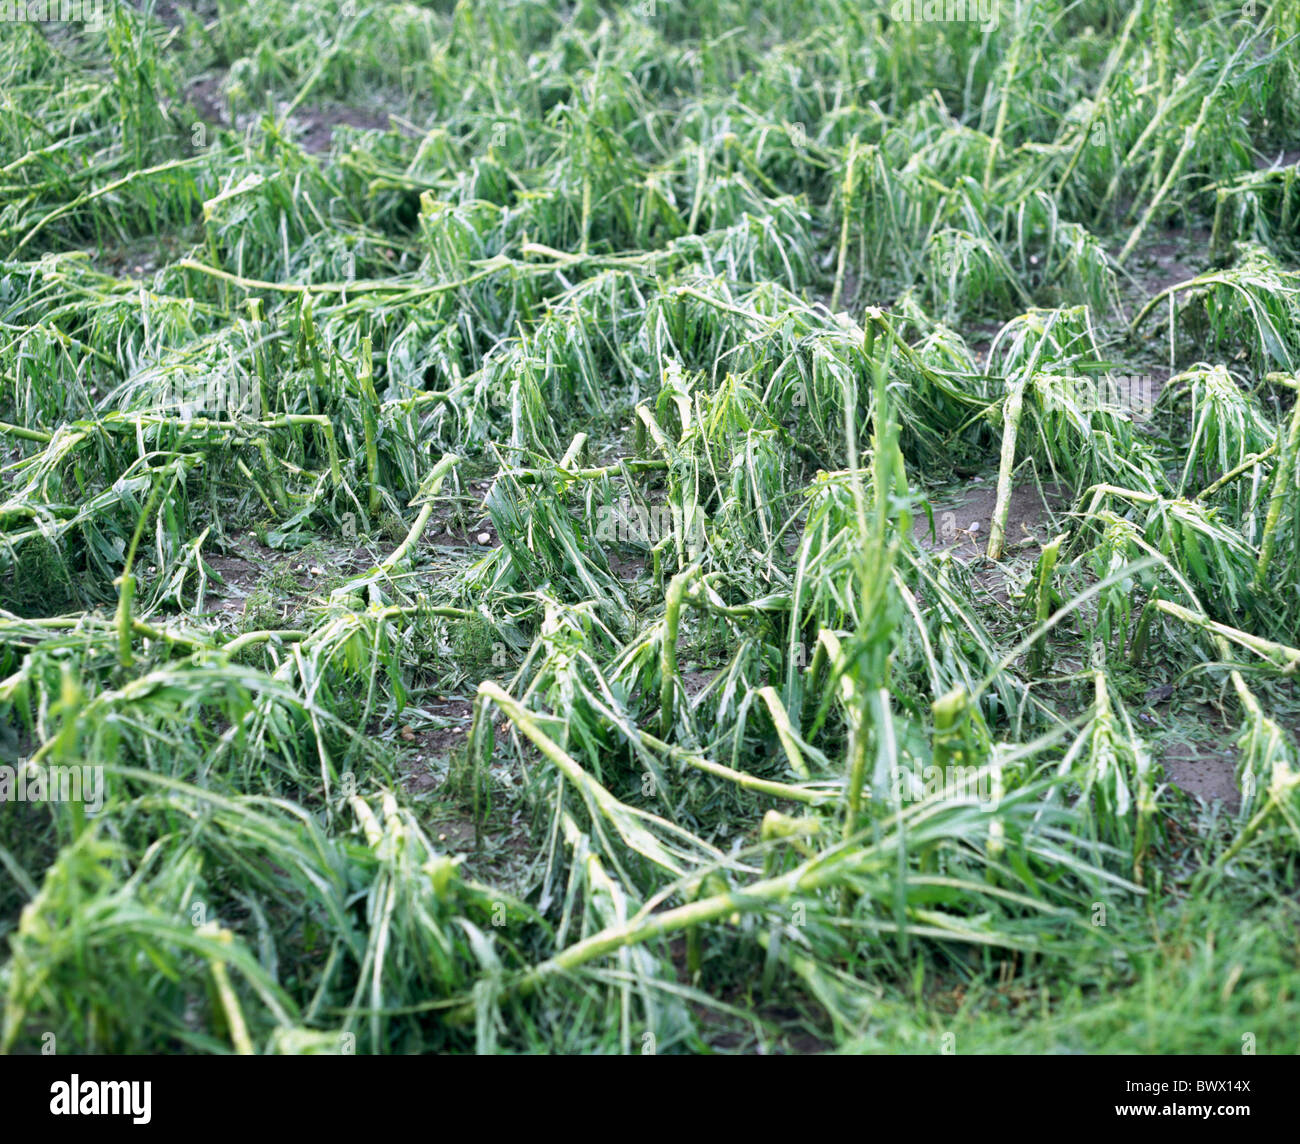 cutting part hail damage corn field pressed down storm damage agriculture damage harm storm storm thunder Stock Photo